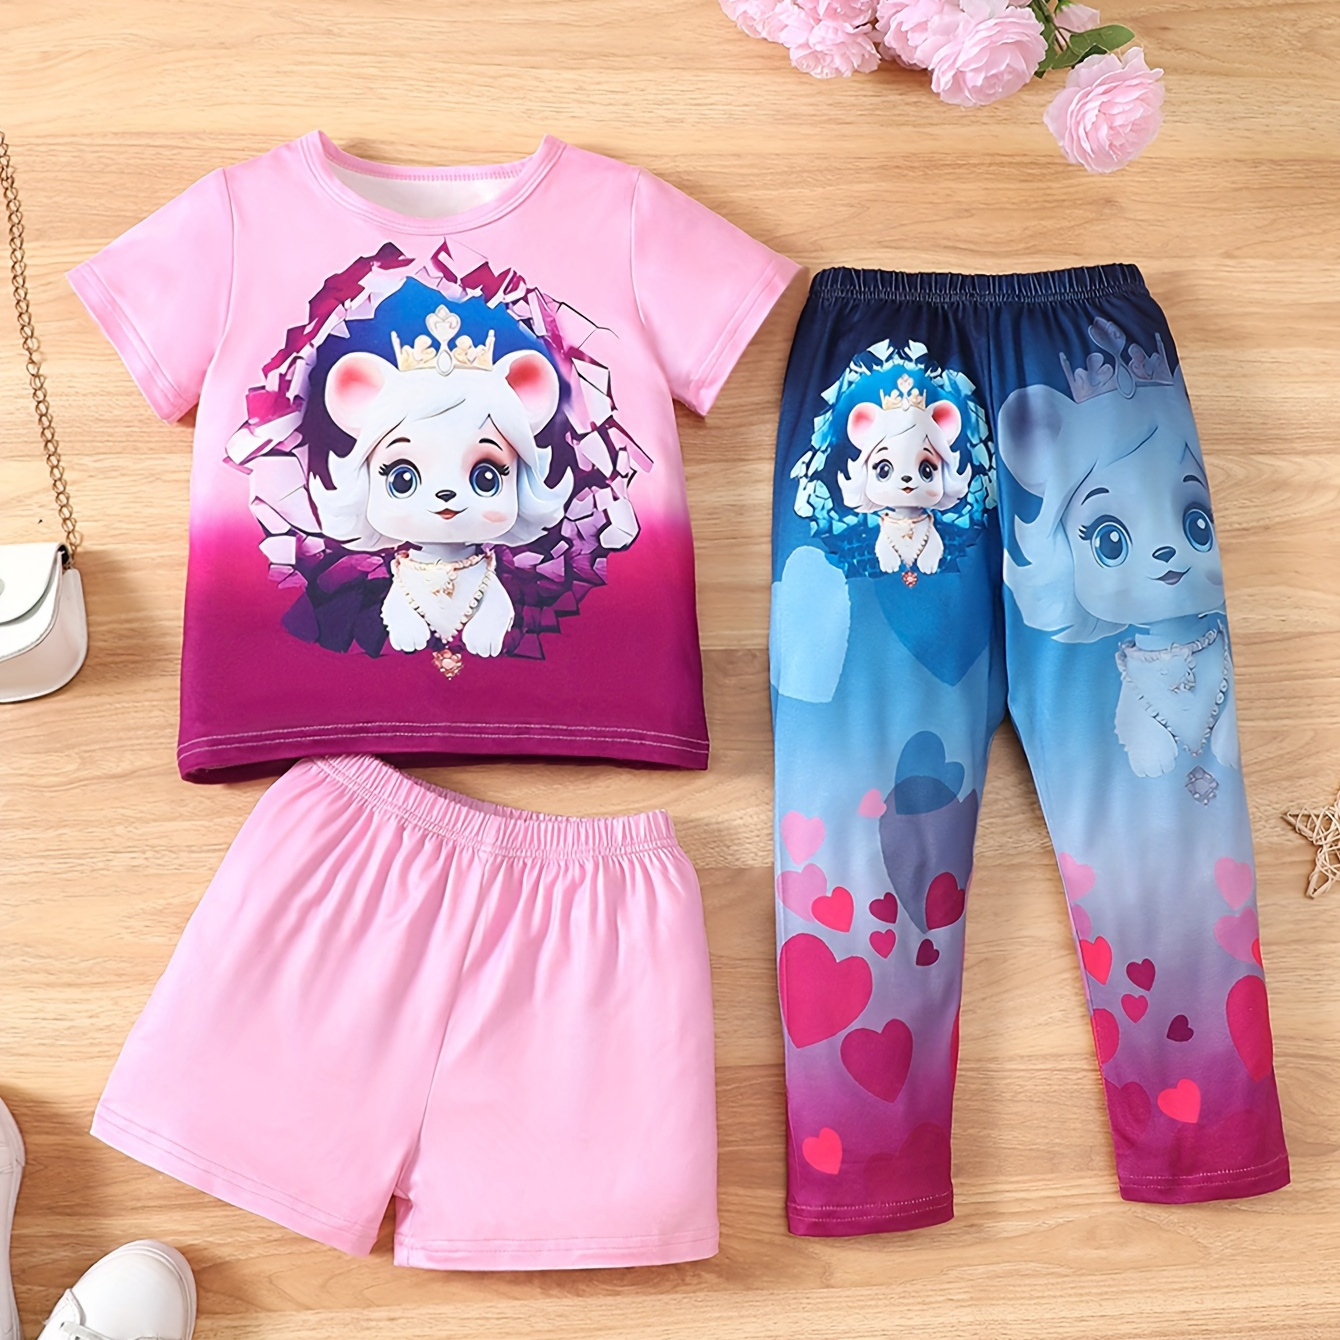 

Baby's Cartoon Dog Digital Print 3pcs Casual Outfit, T-shirt & Shorts & Gradient Pants Set, Toddler & Infant Girl's Clothes For Daily Wear/holiday/party